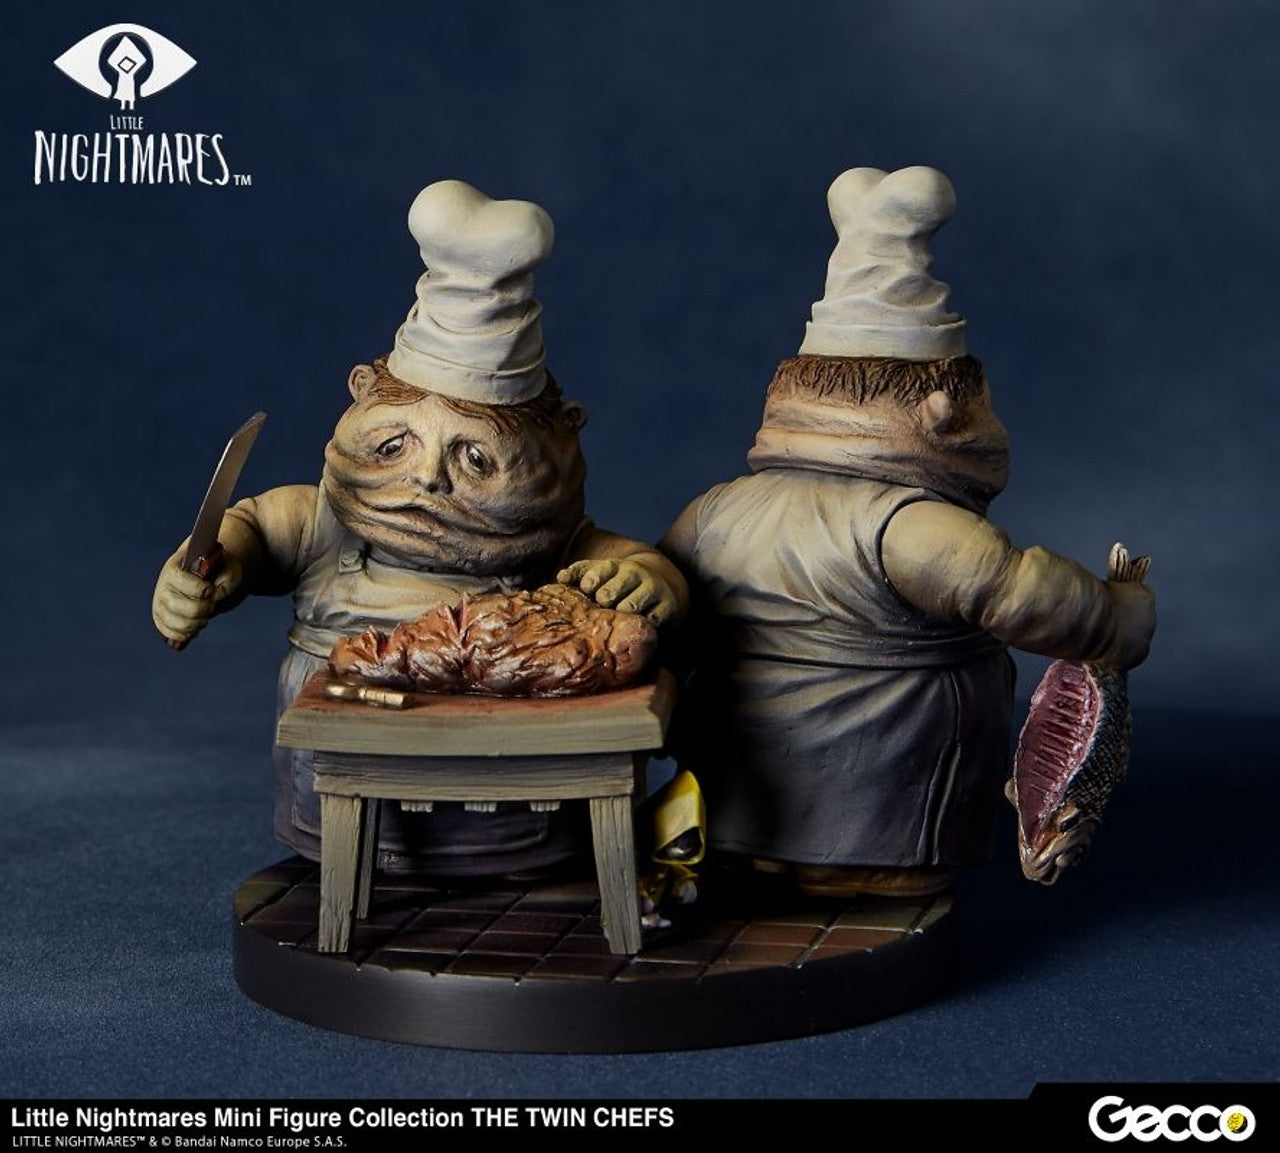 Little Nightmares: The Twin Chefs: Mini Figure Collection